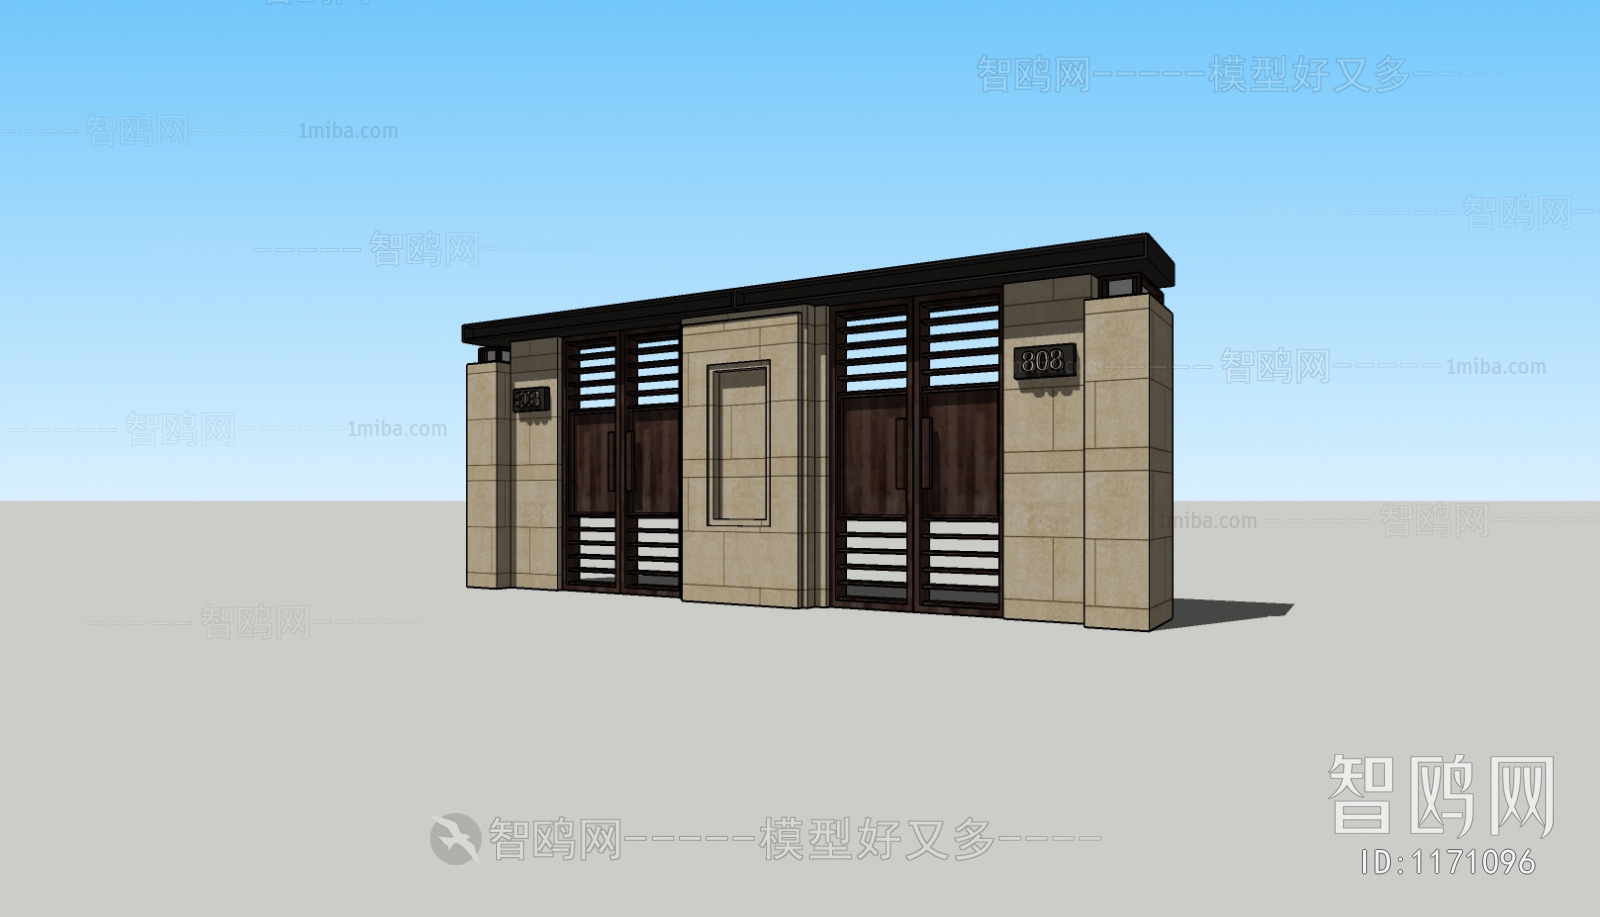 New Classical Style Facade Element